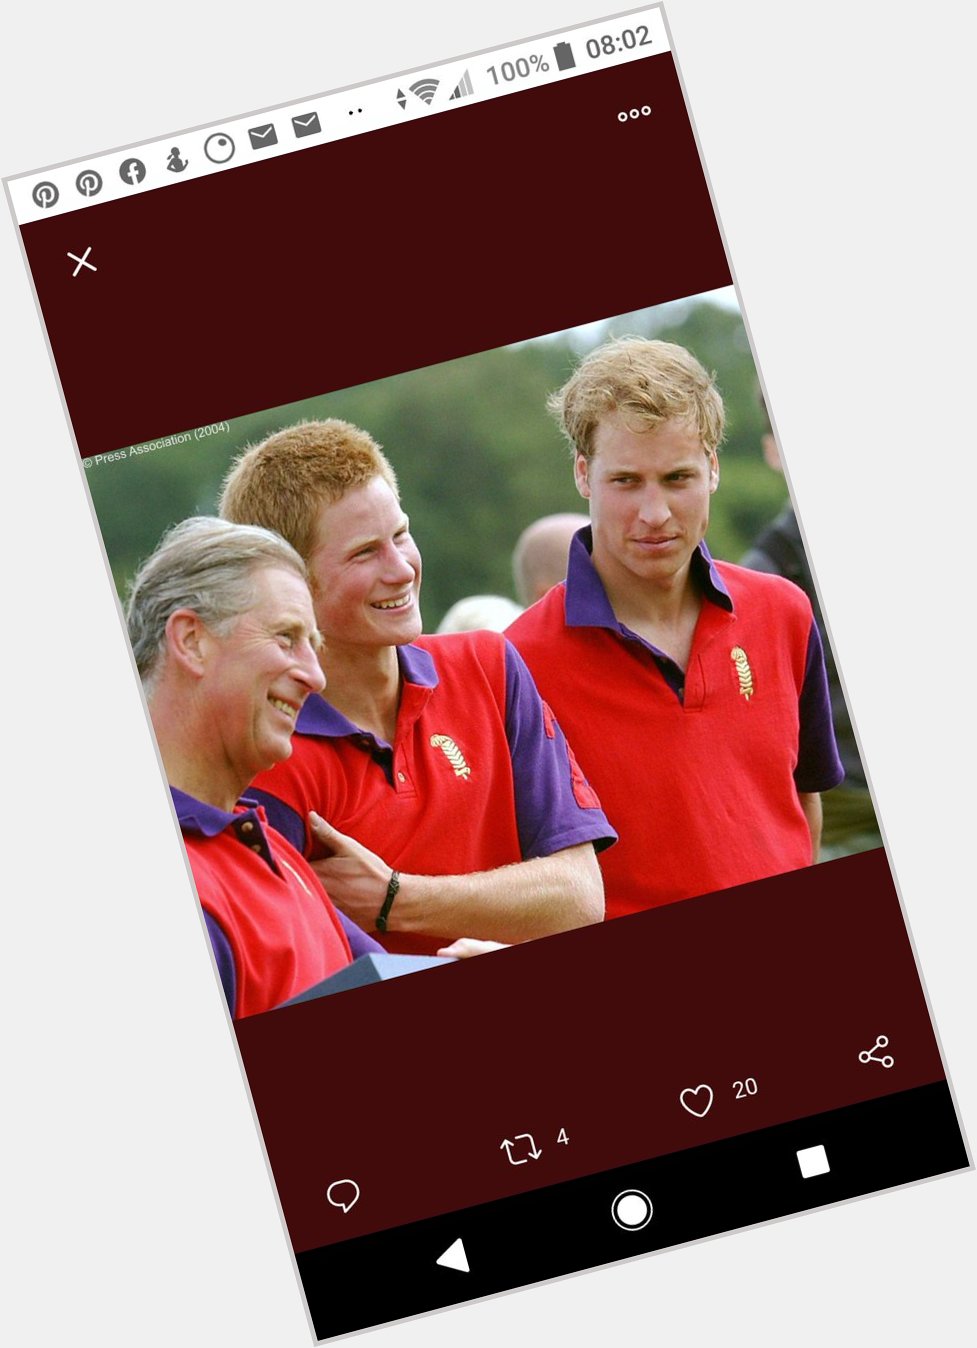 Nice polo tops better be careful farry doesn\t spot them. Happy fathers day and happy birthday Prince William 